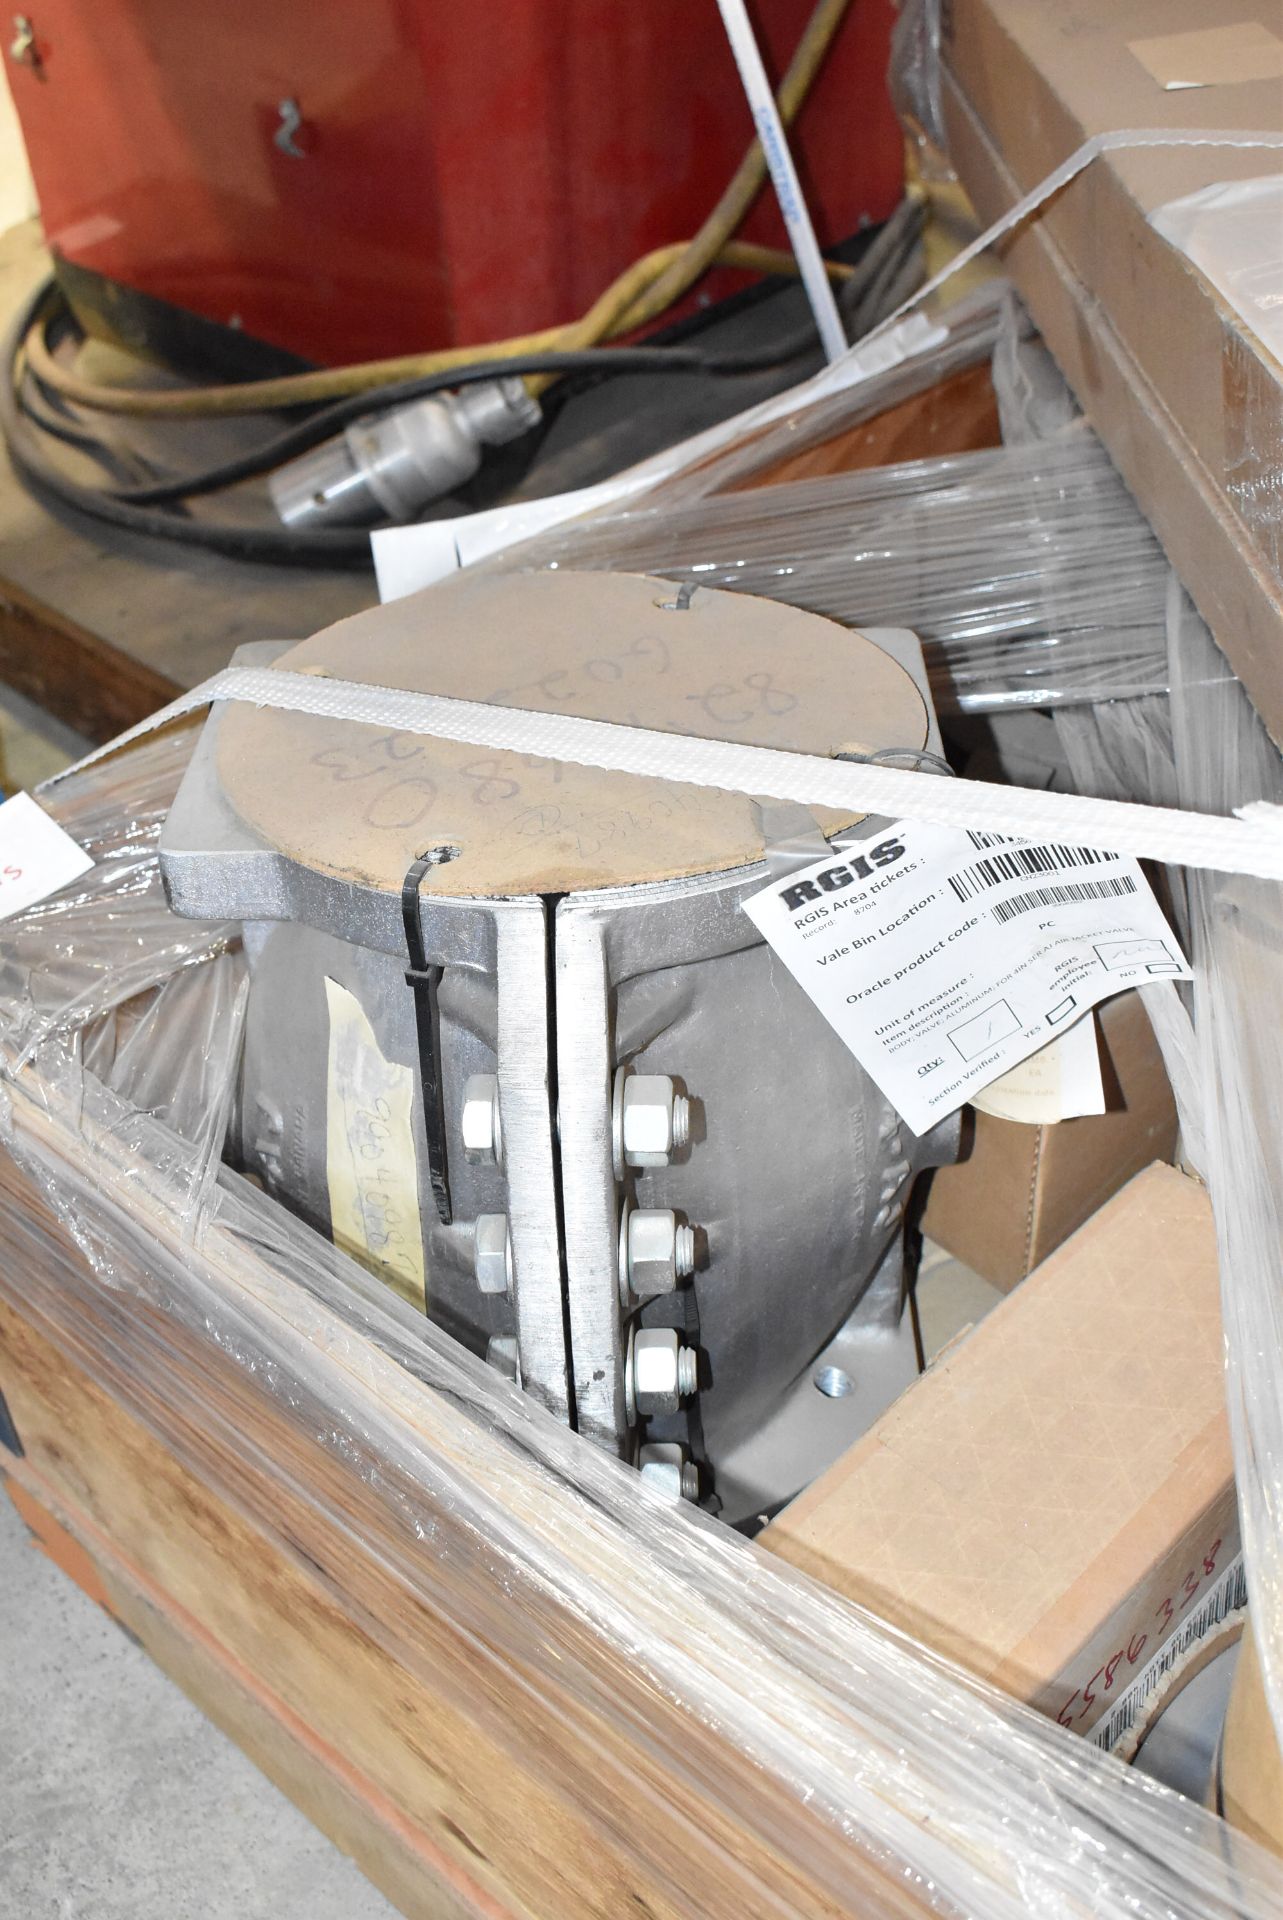 LOT/ CRATE WITH SPARE PARTS CONSISTING OF SHAFTS, IMPELLERS, SPROCKETS, PULLEYS, PLUGS & BASEBOARD - Image 5 of 9